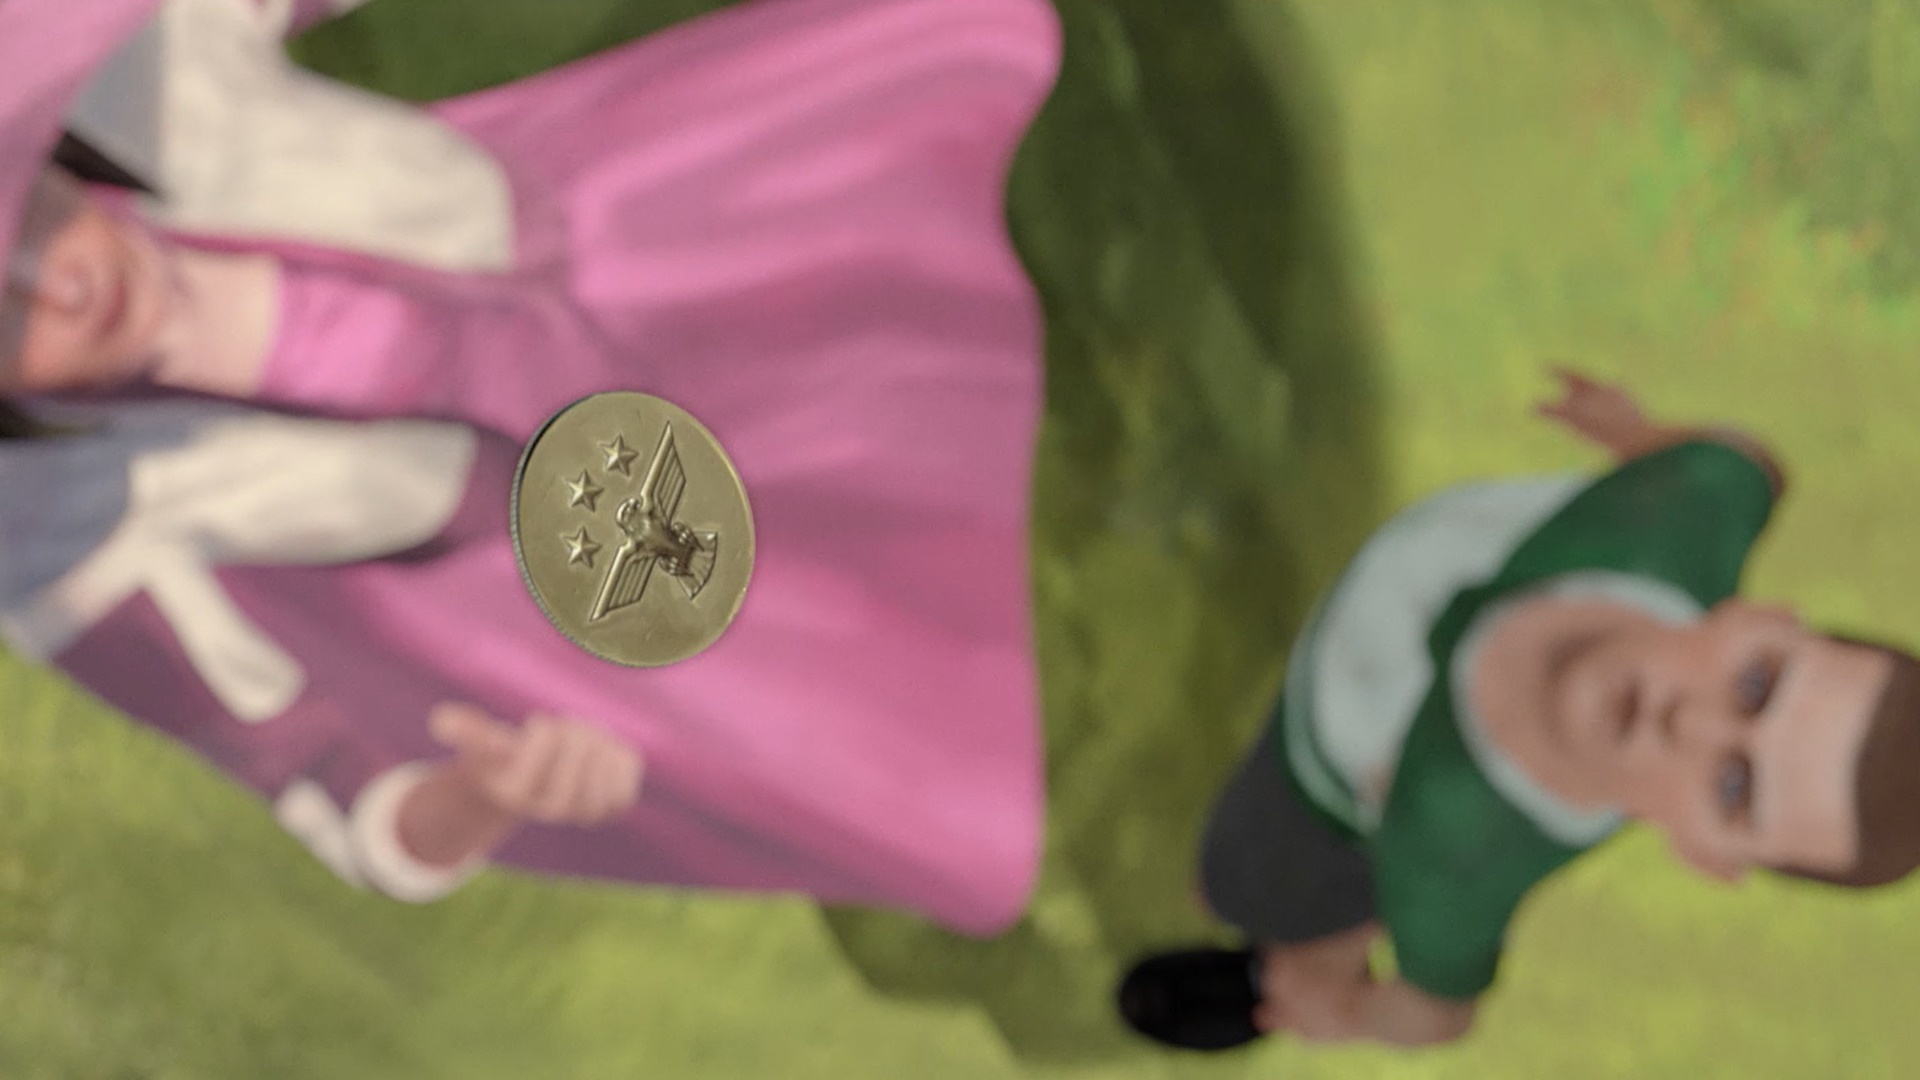 Image from the Halo: Fall of Reach animated series showing Dr. Halsey tossing a coin for a 6 year old John